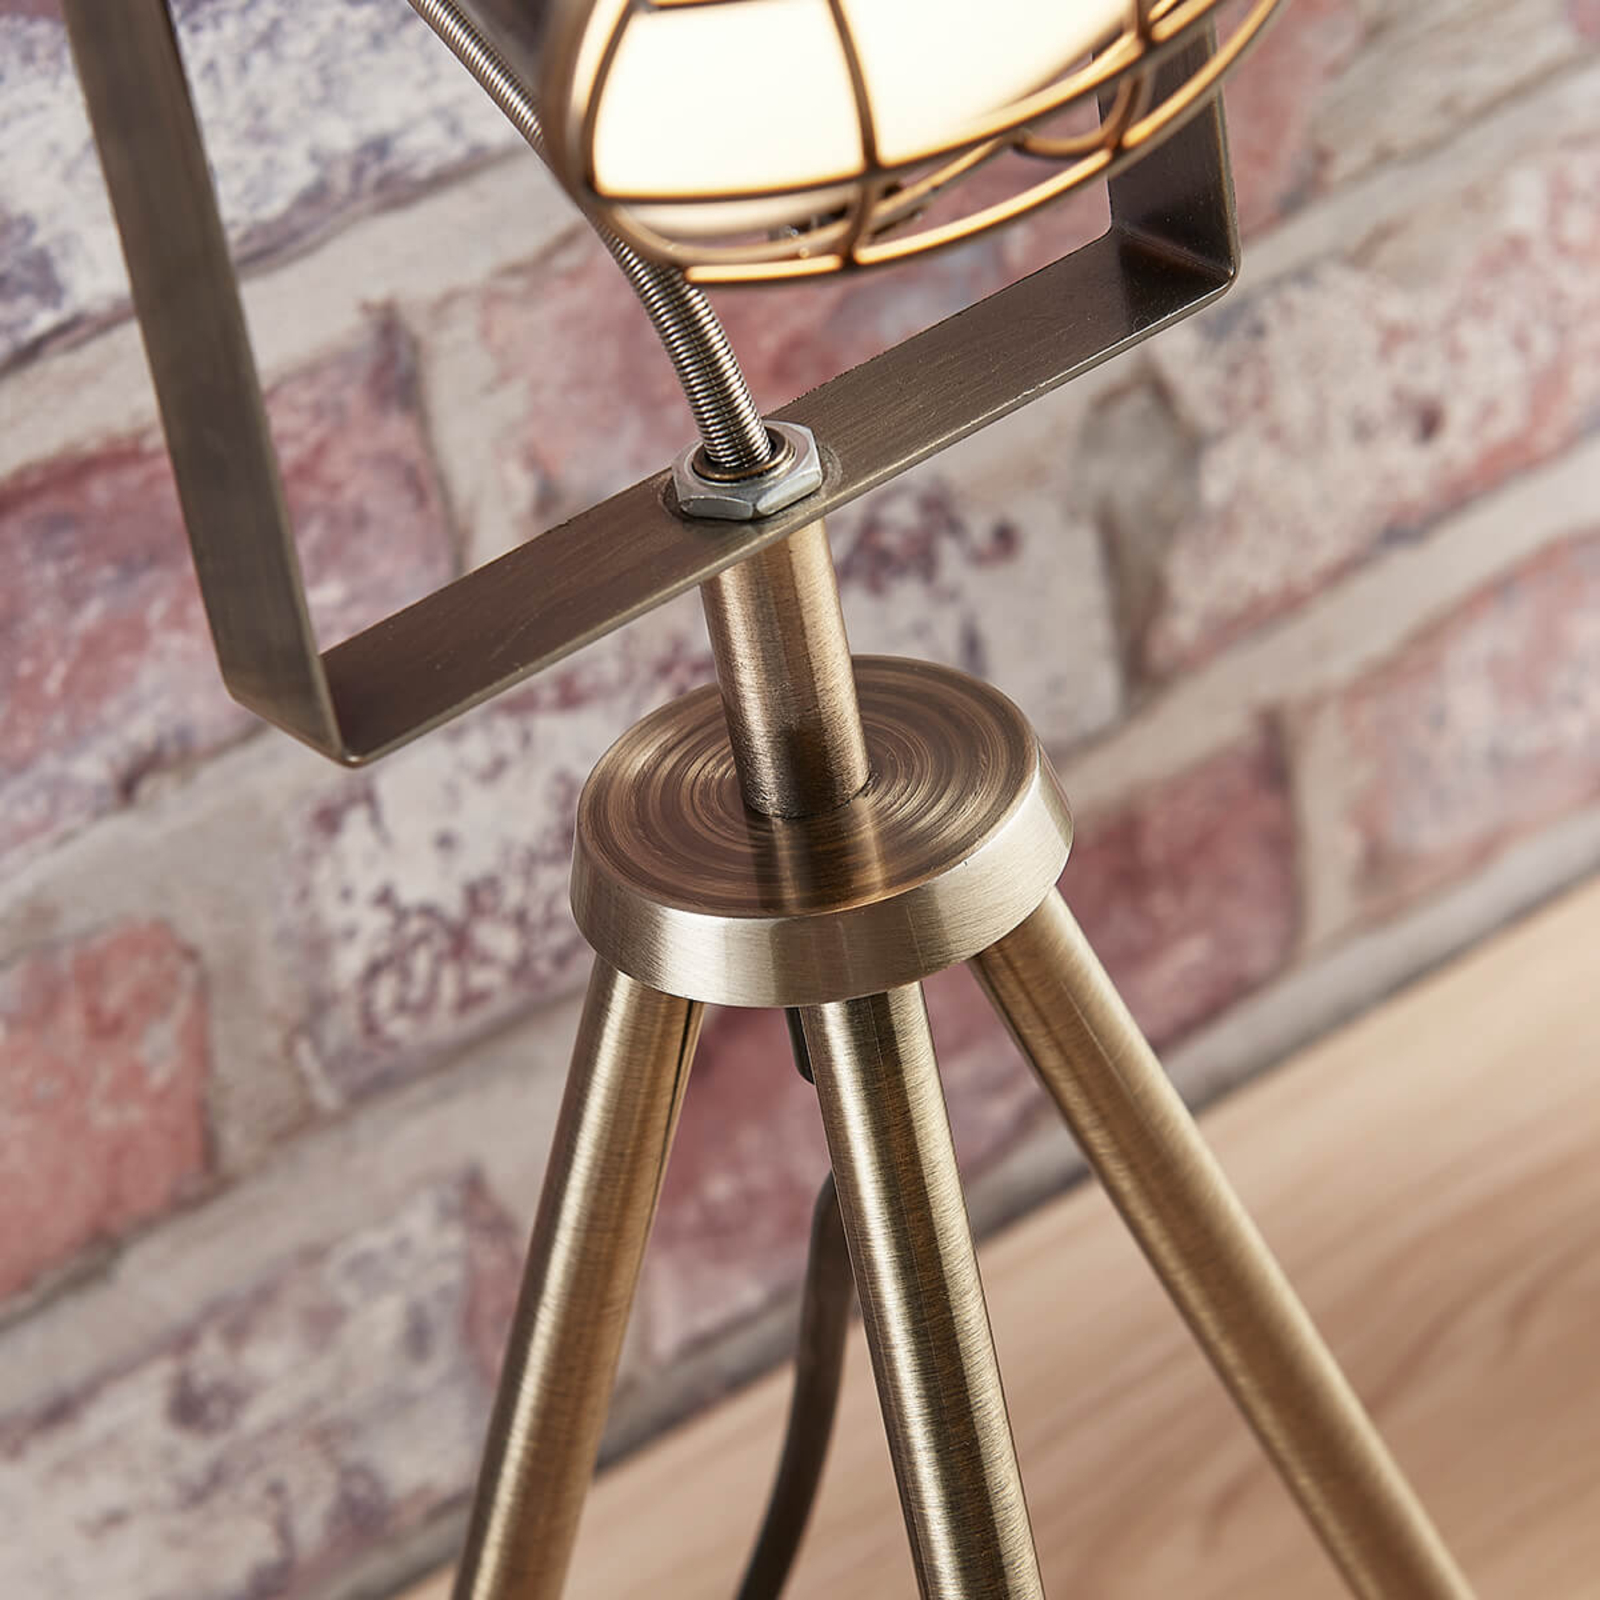 Industrial-looking table lamp Ebbi, antique brass